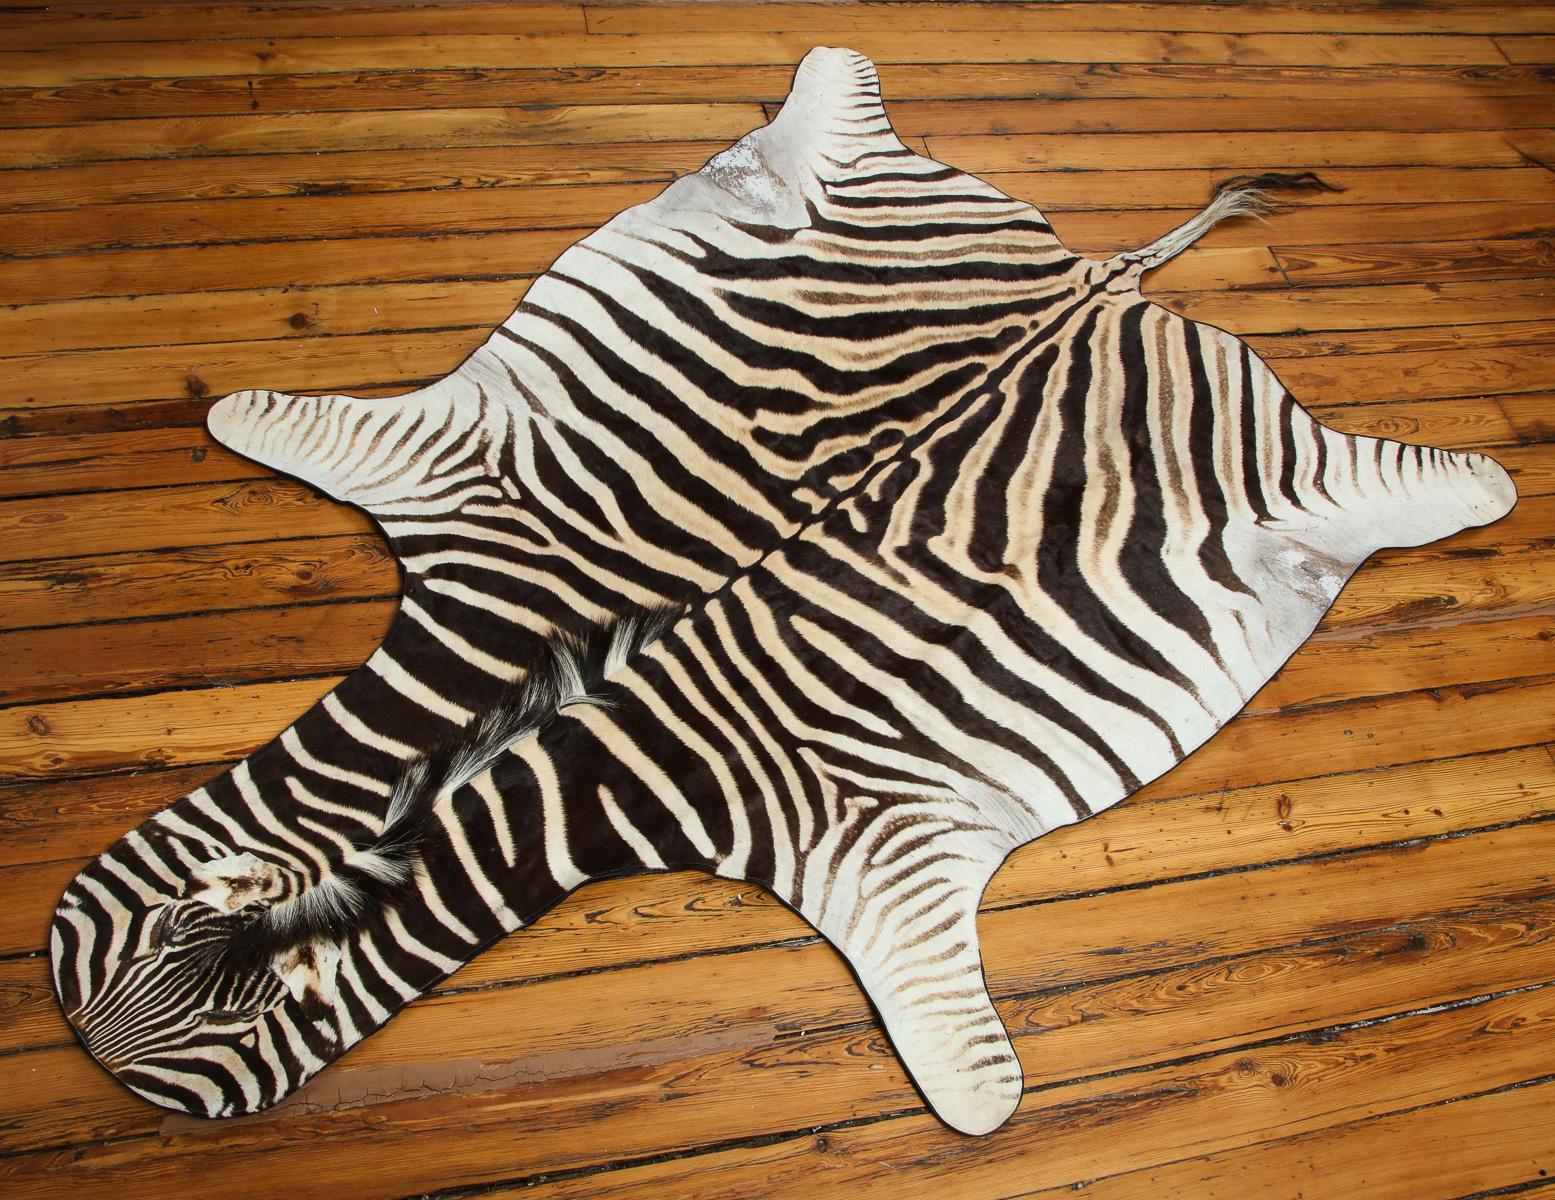 Beautiful zebra rug. This one is extra white which is very hard to find.
Backed with wool and trimmed all around with leather.